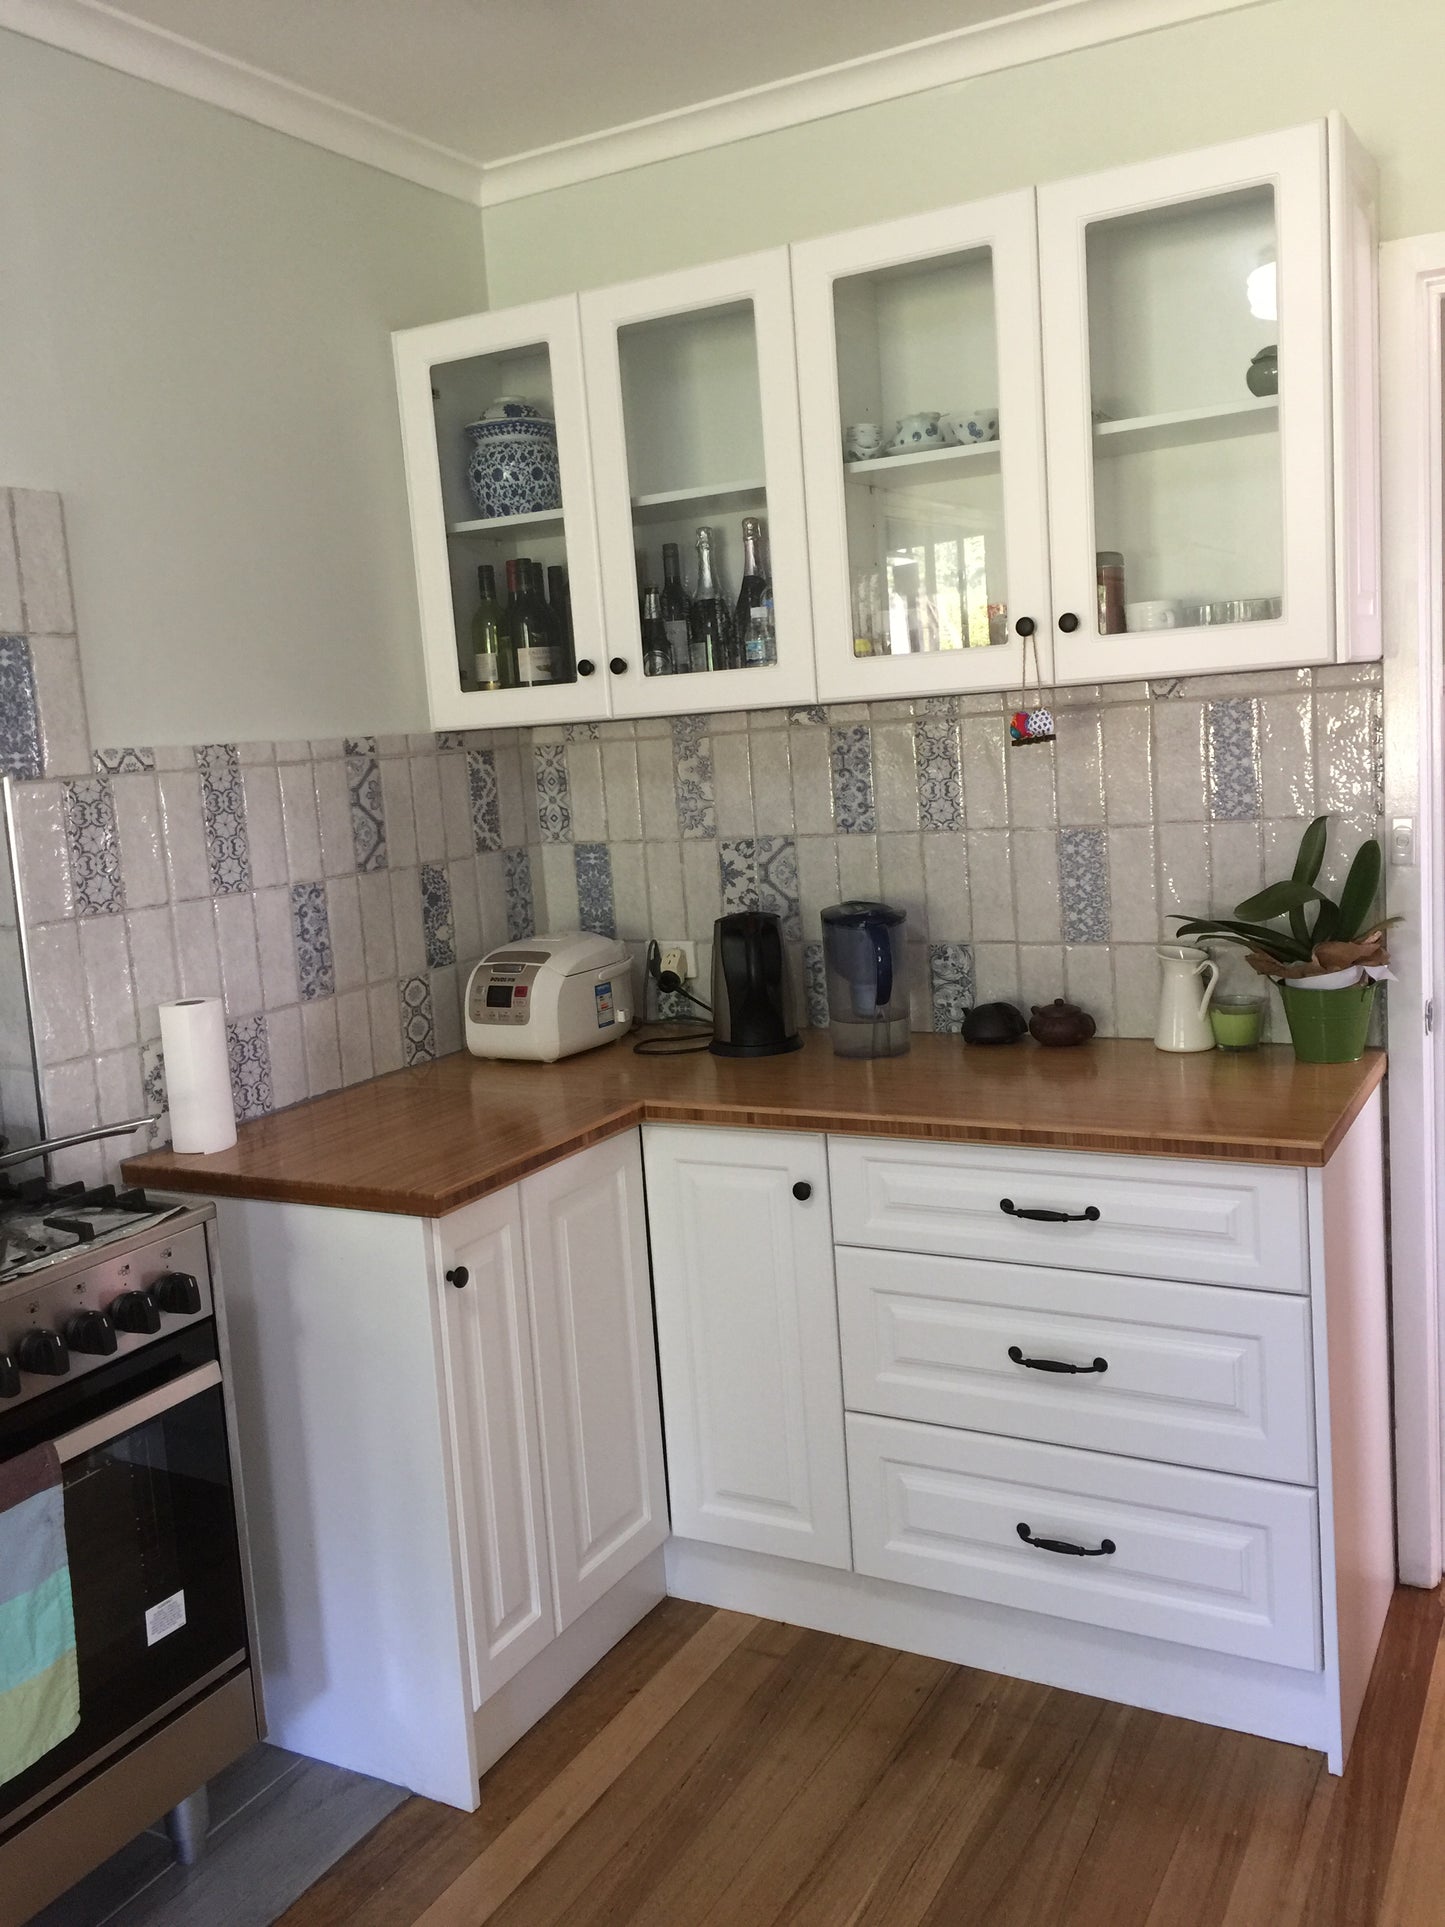 Flat Pack Kitchen Cabinets Wall Glass Cabinets